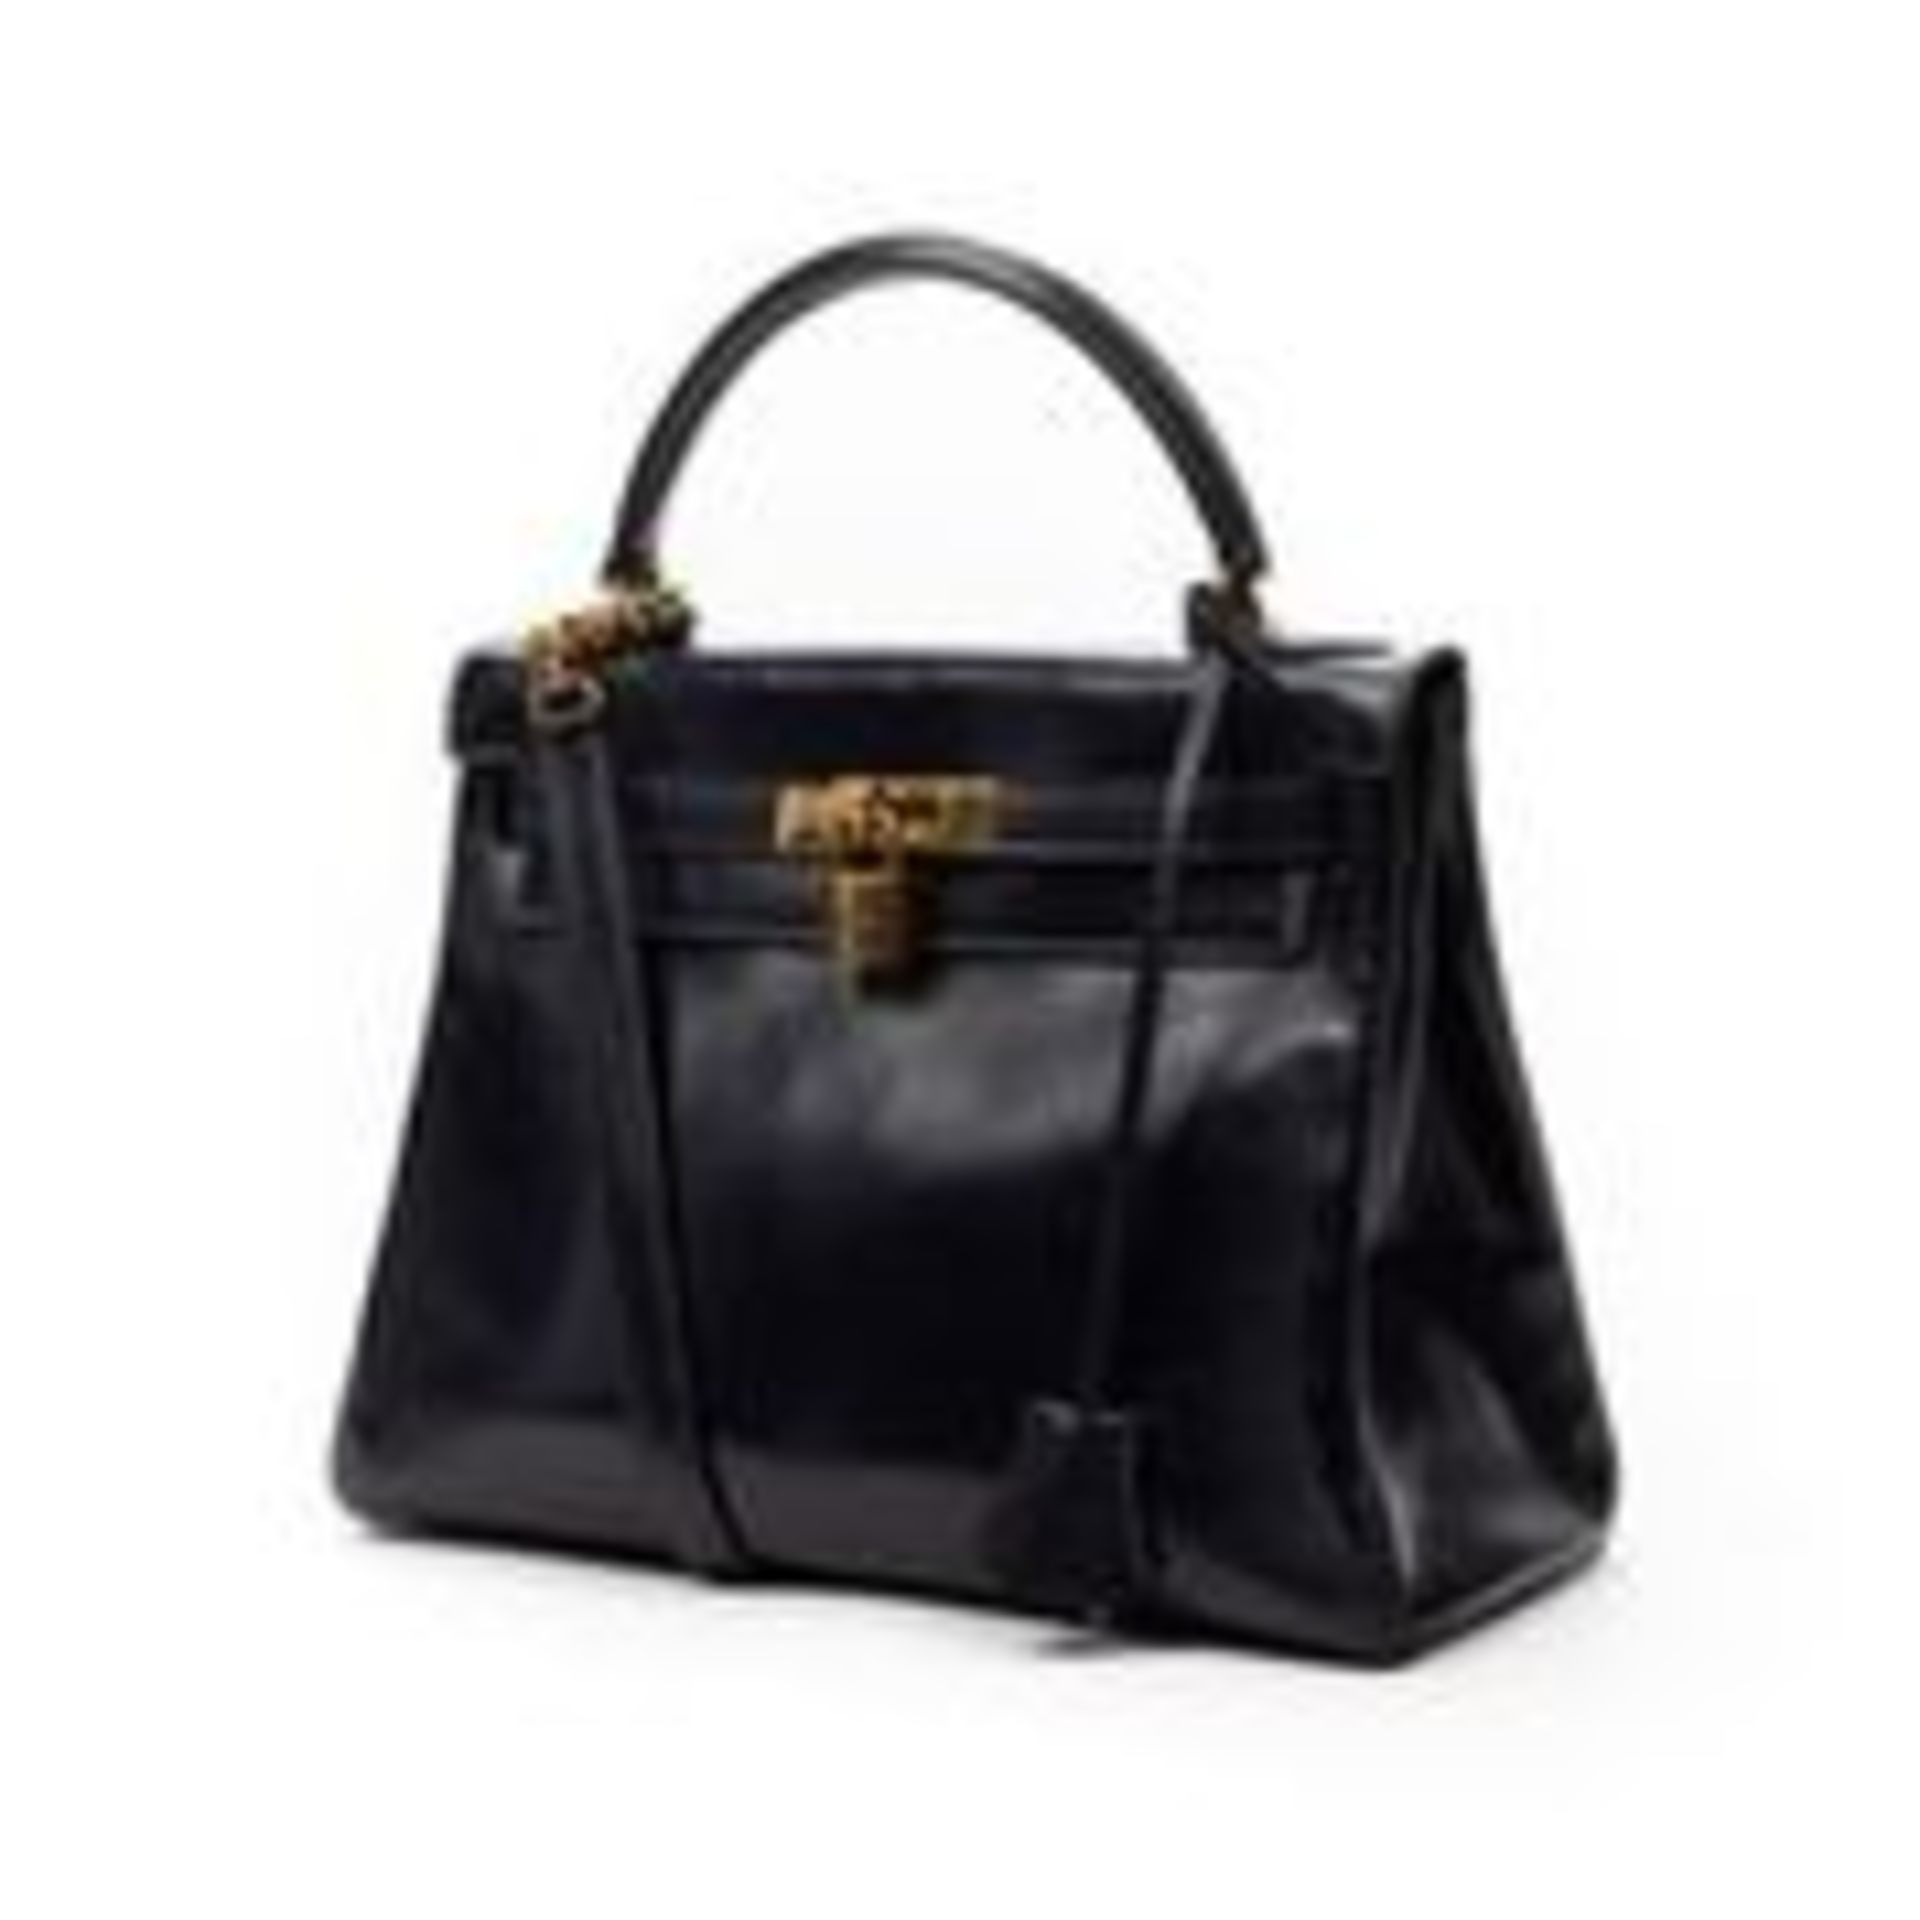 Vintage Hermes Kelly Handbag Navy Blue - EAG5035 - Grade AB - Please Contact Us Directly For